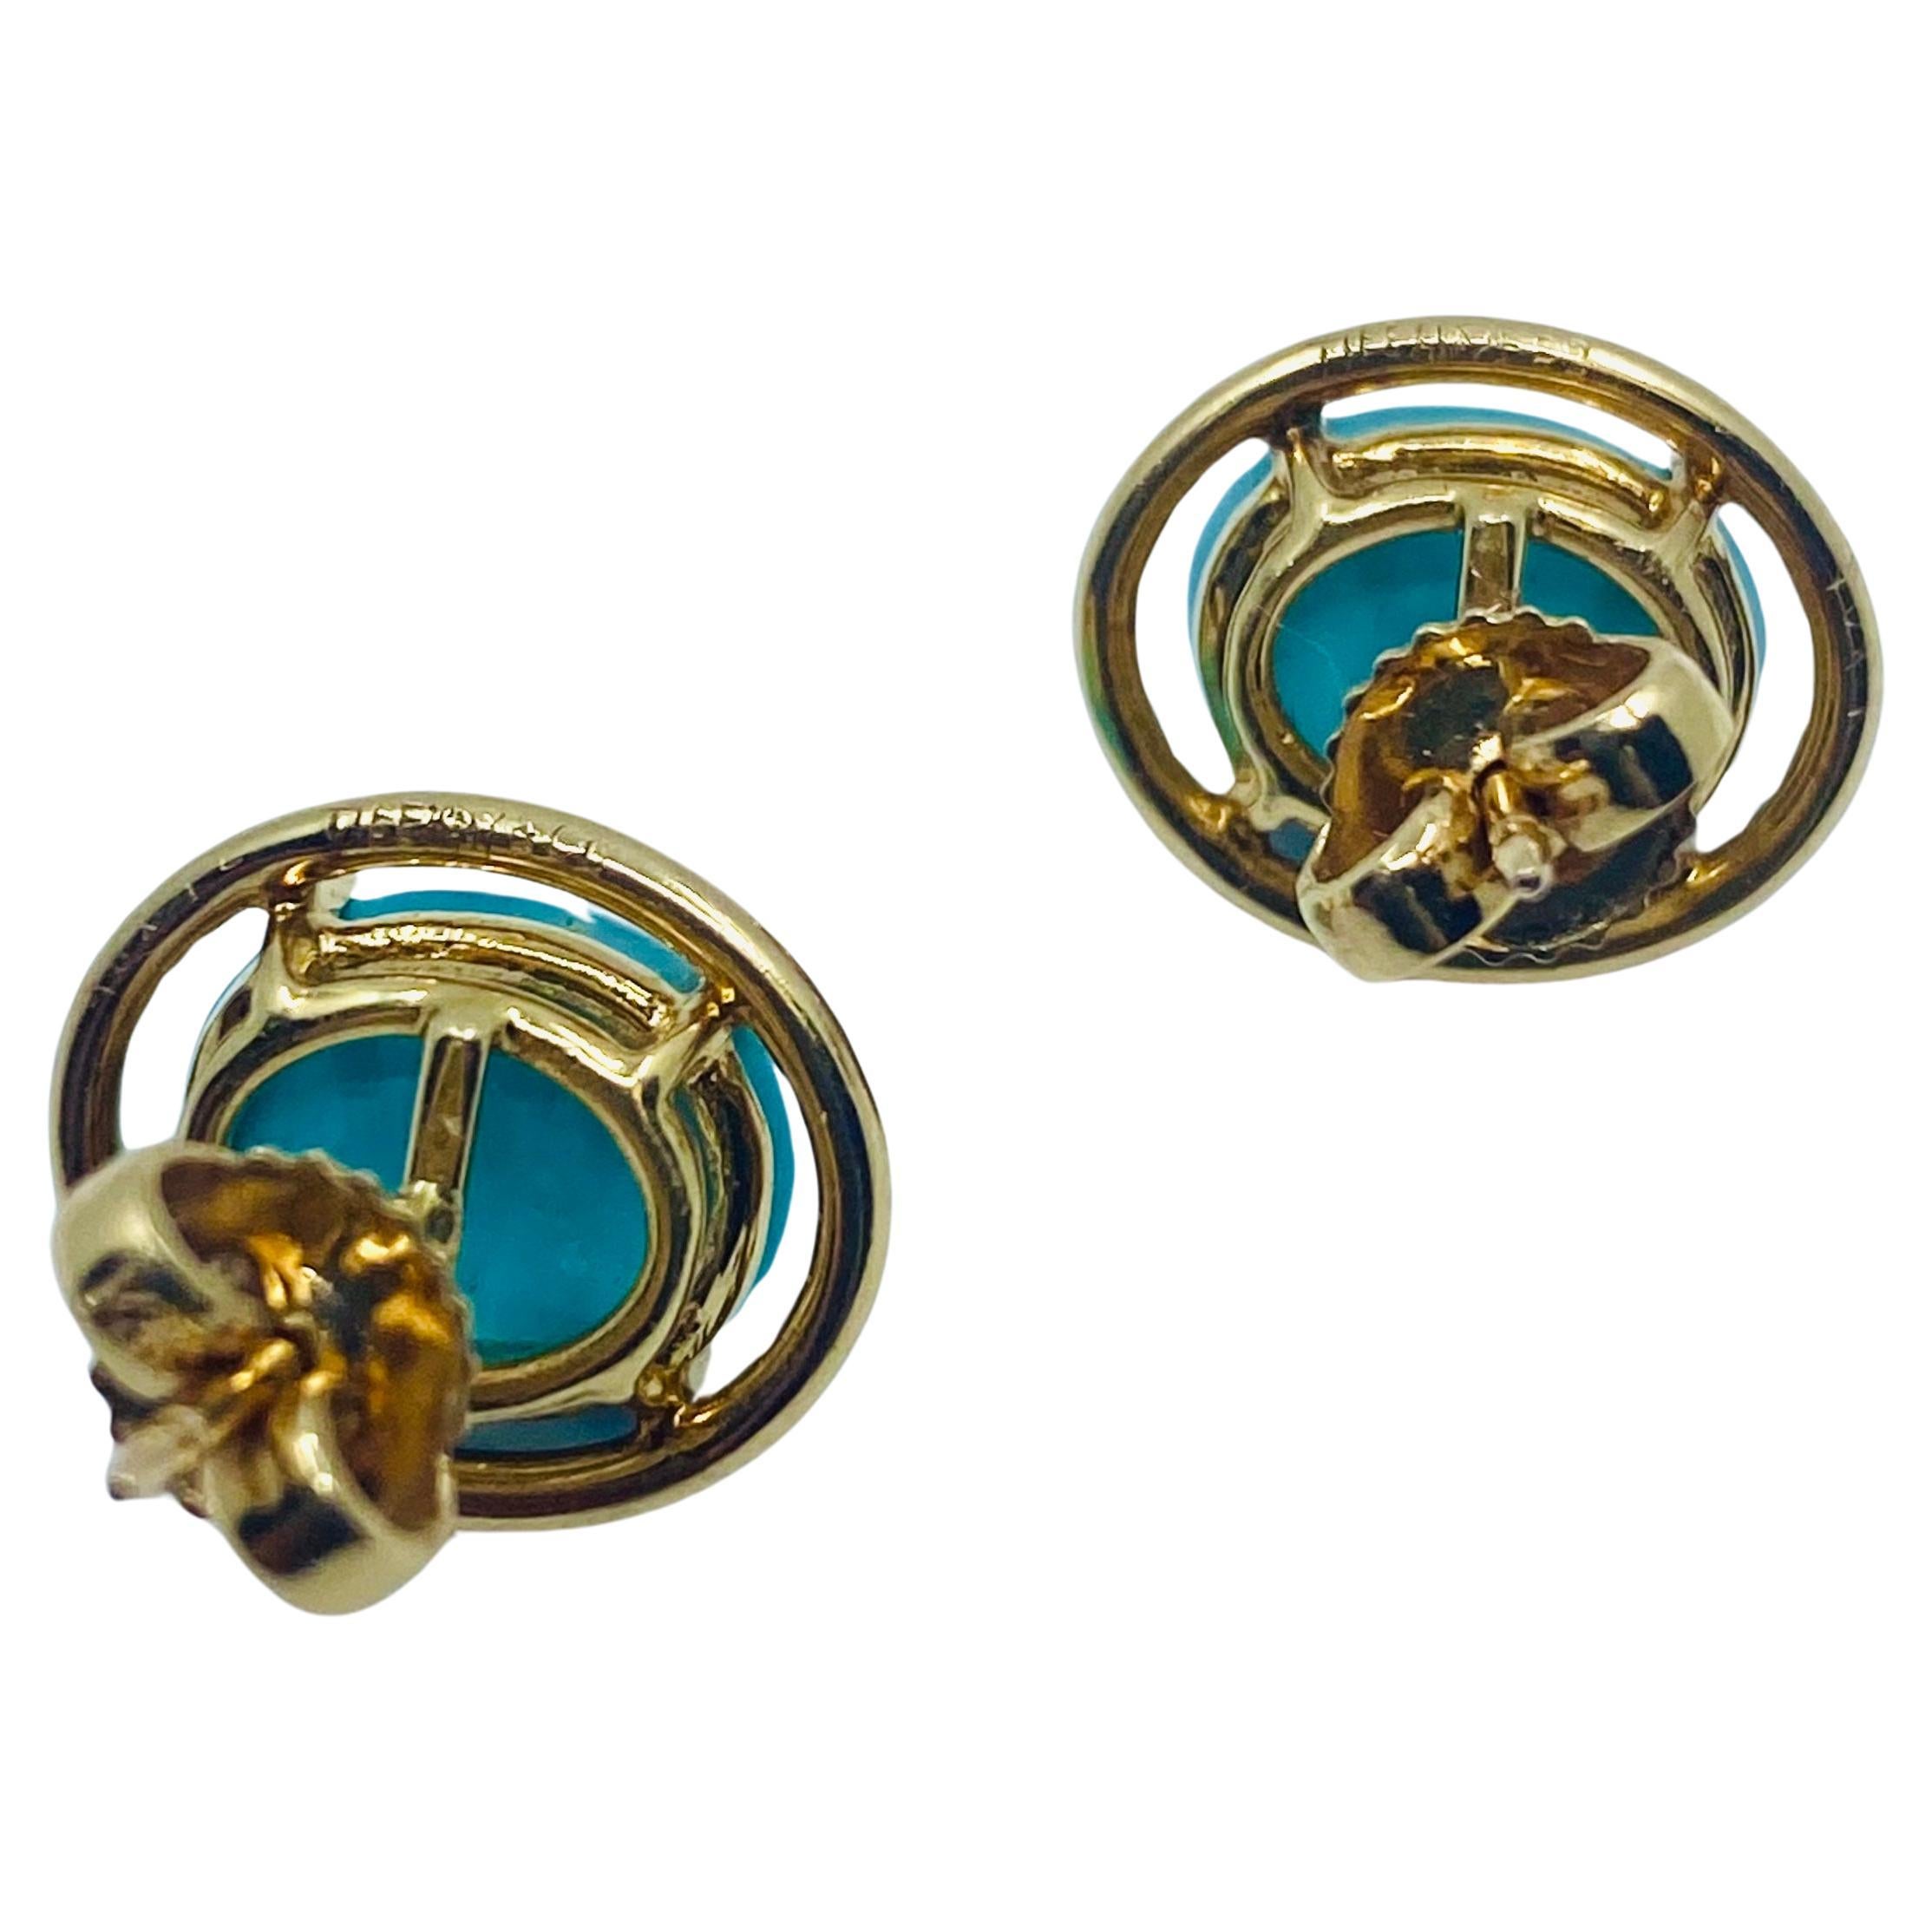 Tiffany & Co. Boucles d'oreilles Turquoise 14k Or 1